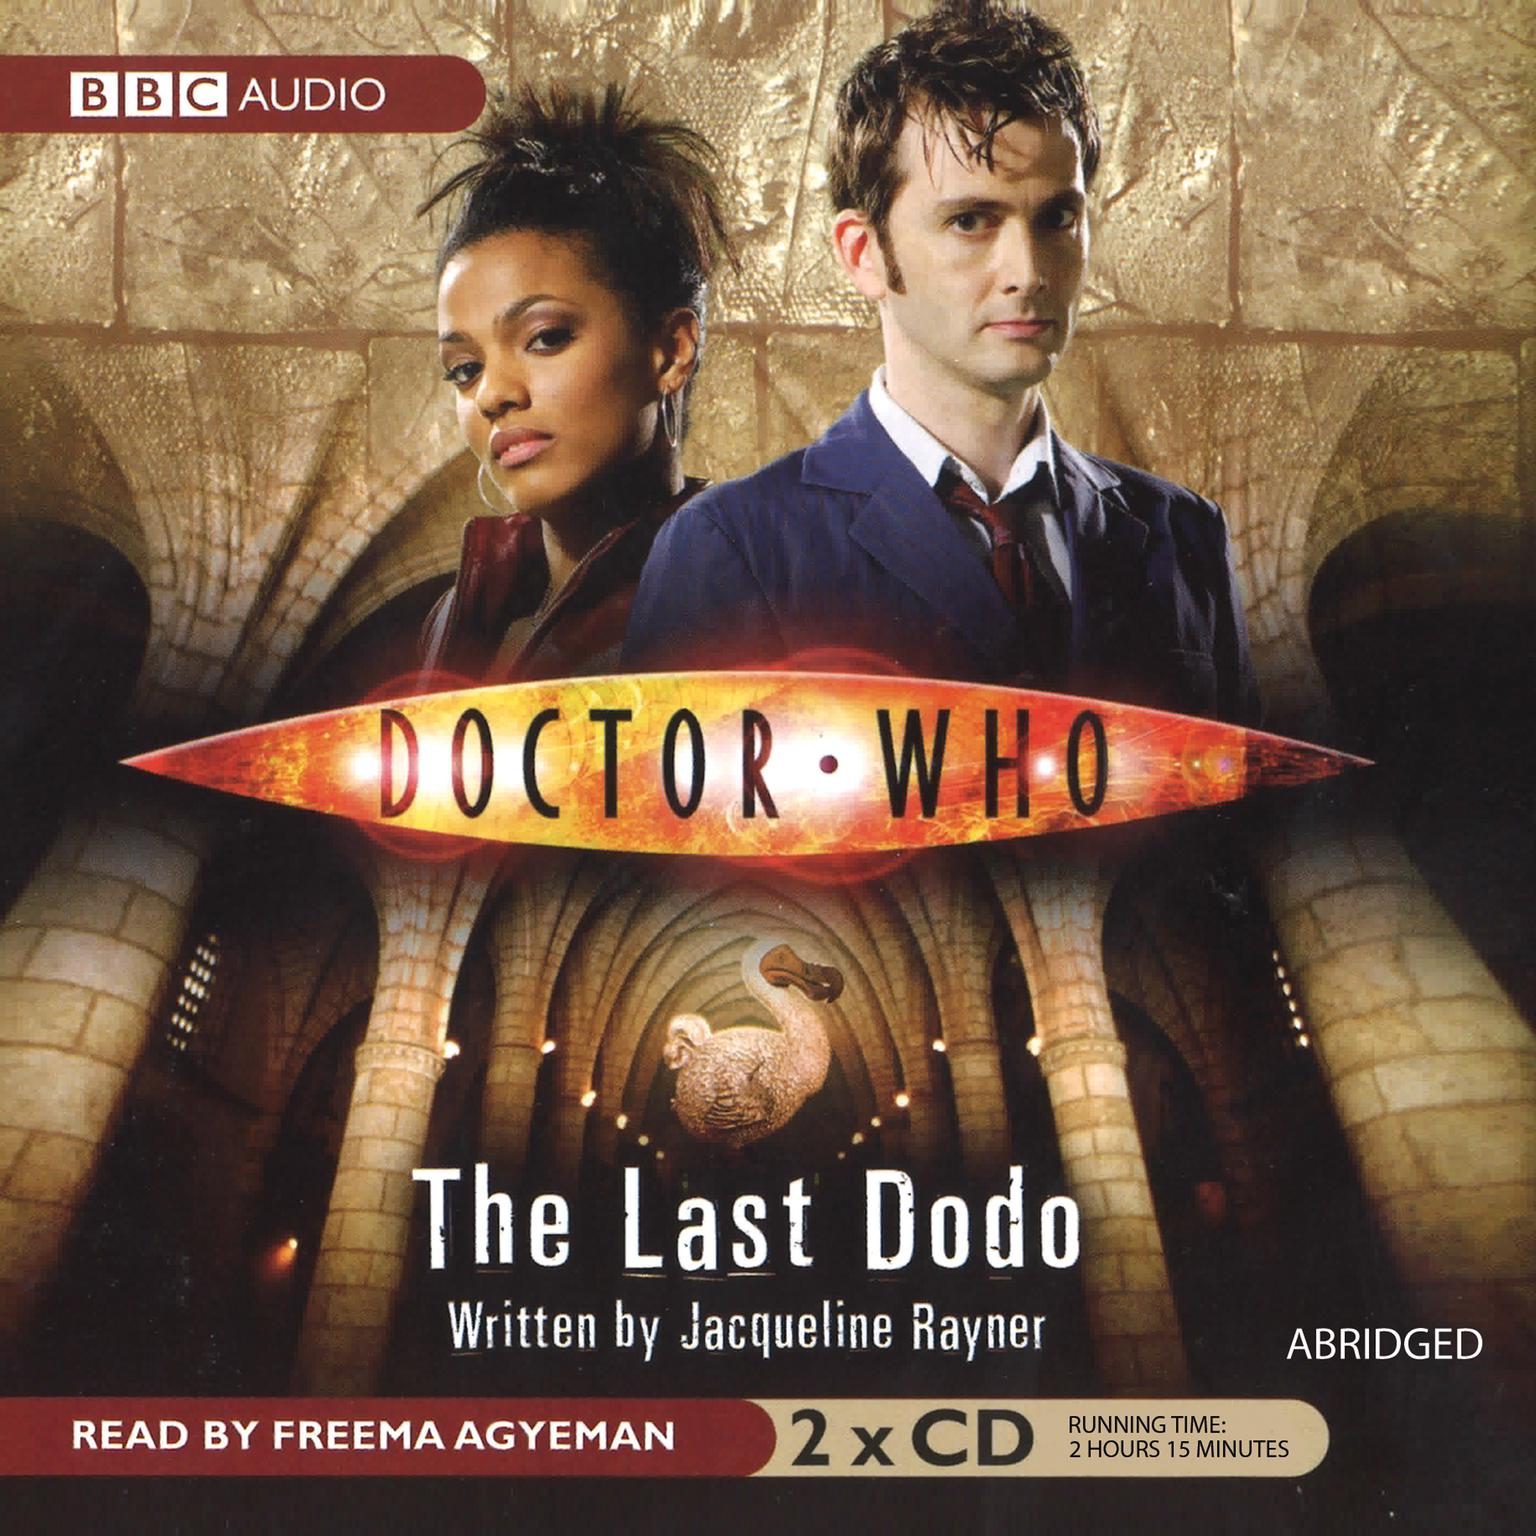 Doctor Who: The Last Dodo (Abridged) Audiobook, by Jacqueline Rayner